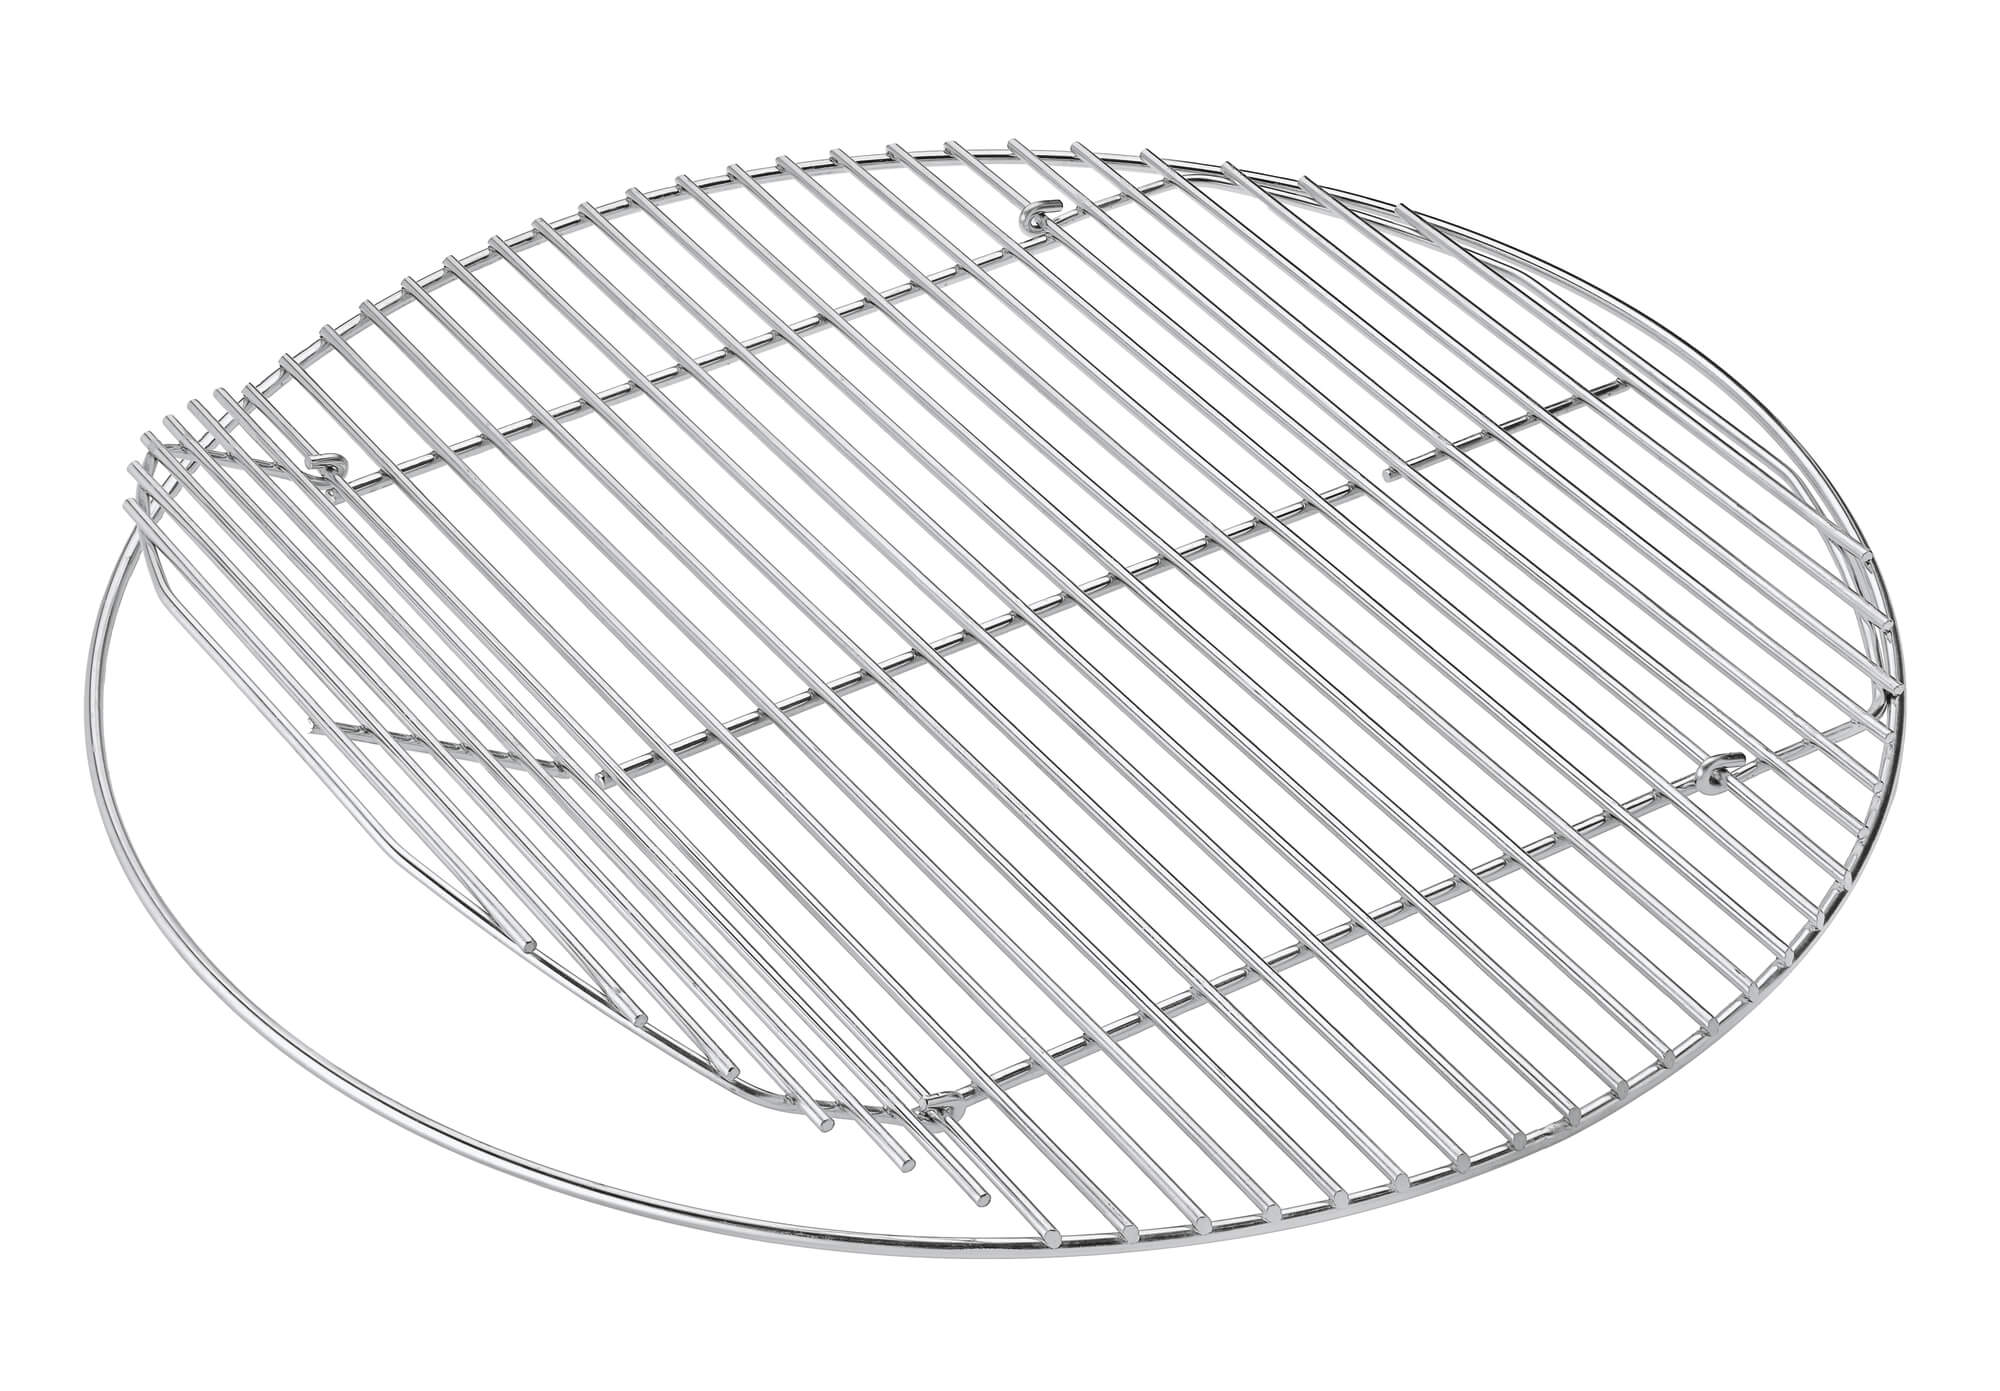 Stainless steel grill grate sport F60